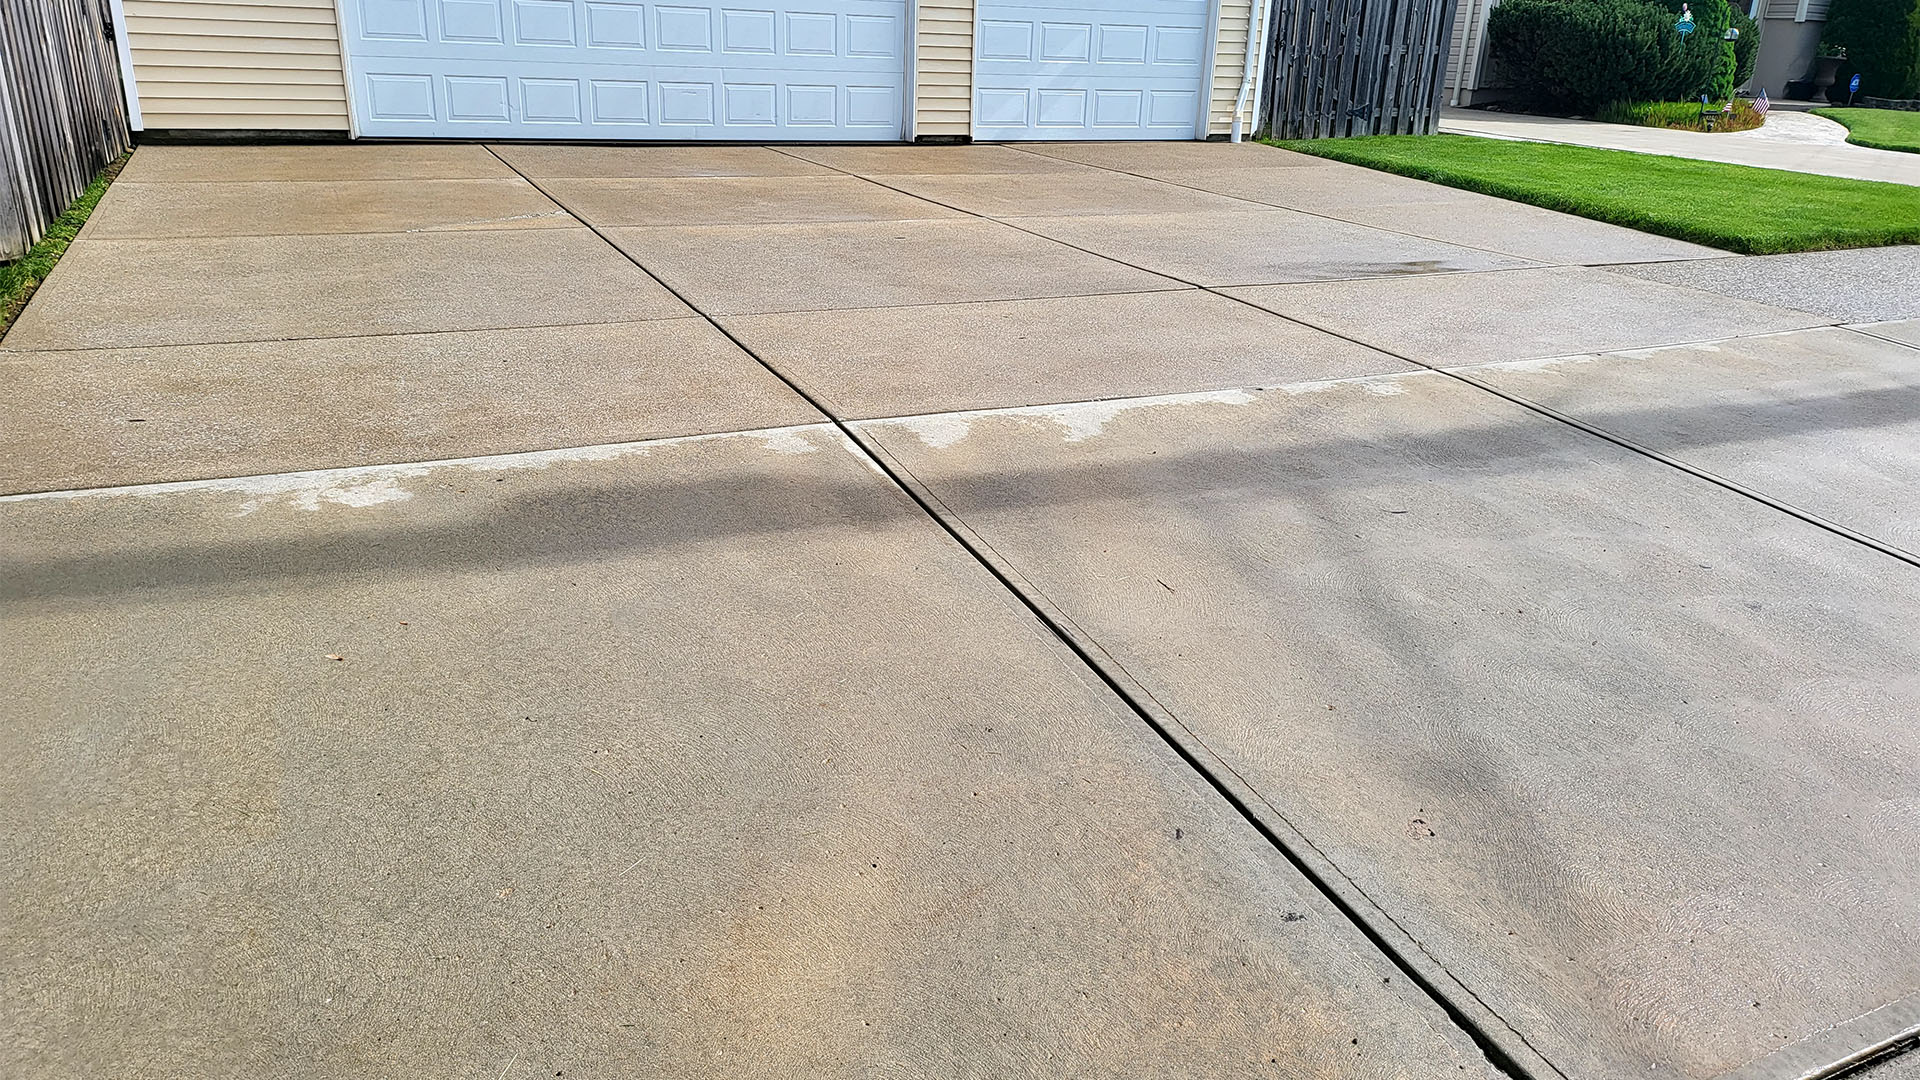 driveway cleaning,driveway cleaning services,affordable driveway cleaning,driveway pressure washing,pressure washing driveway,driveway sealing